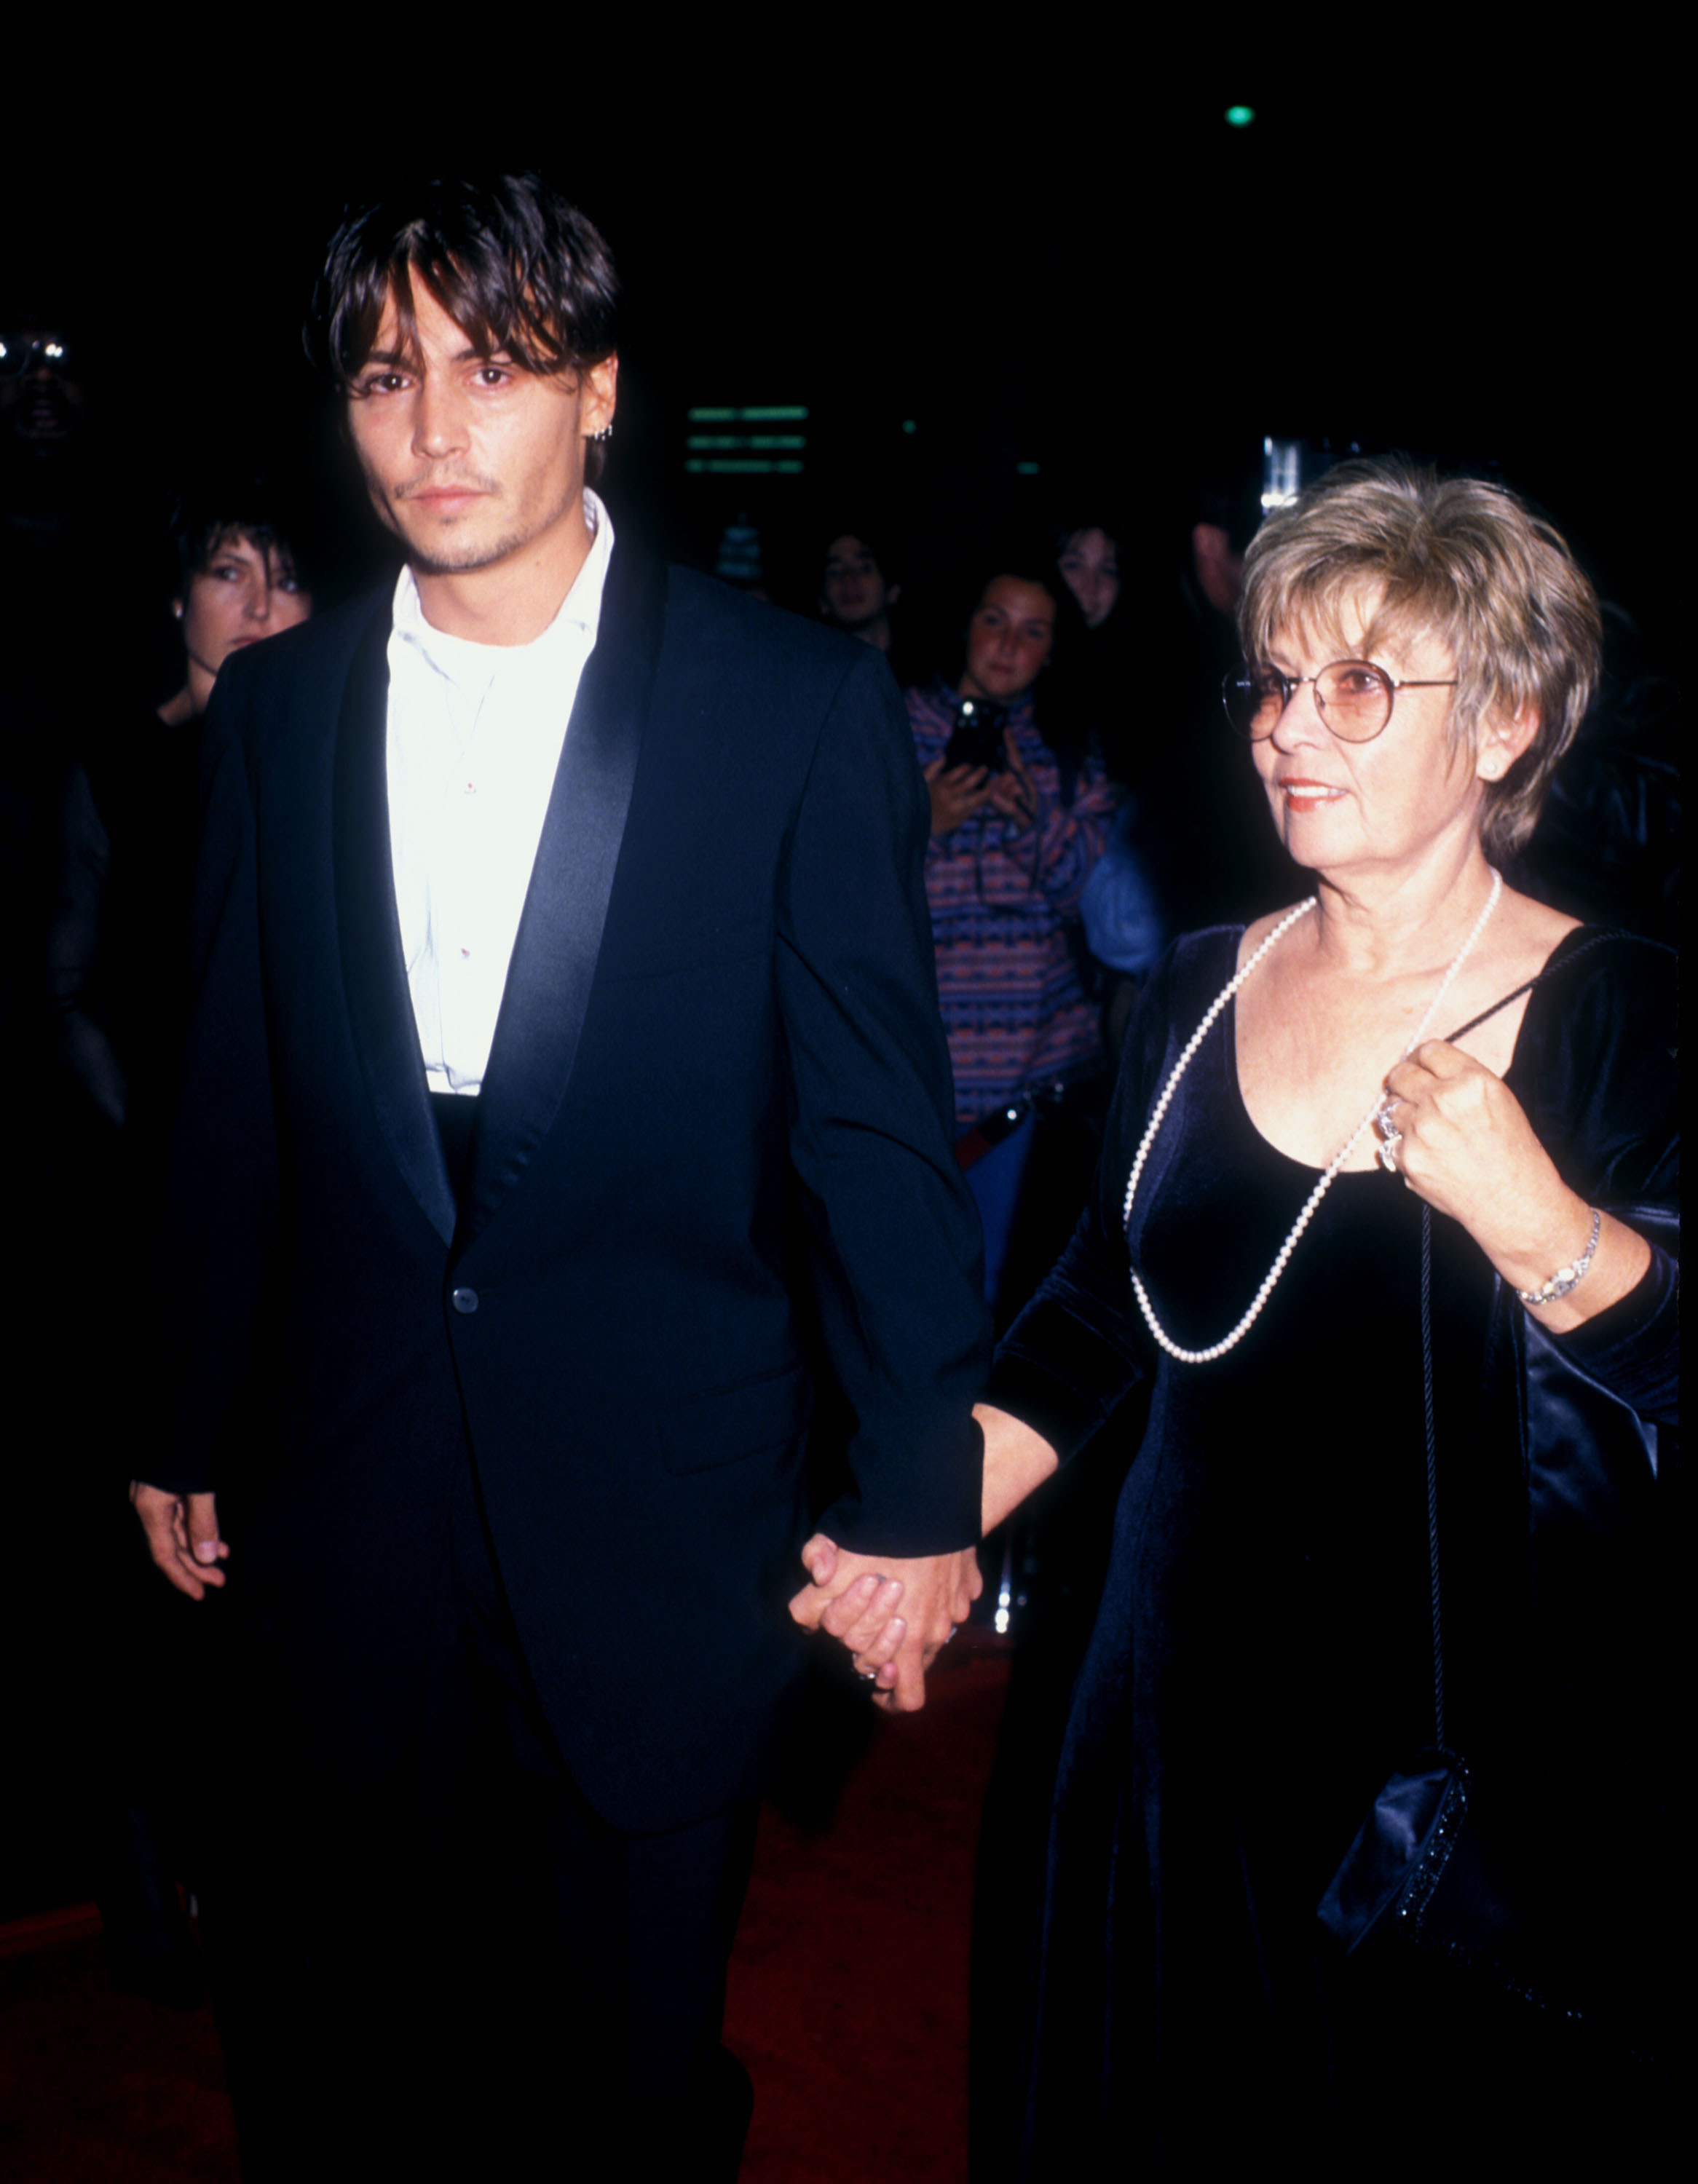 Johnny Depp and his mother at the premiere of "Nick of Time" on November 20, 1995, in Beverly Hills, California. | Source: Getty Images